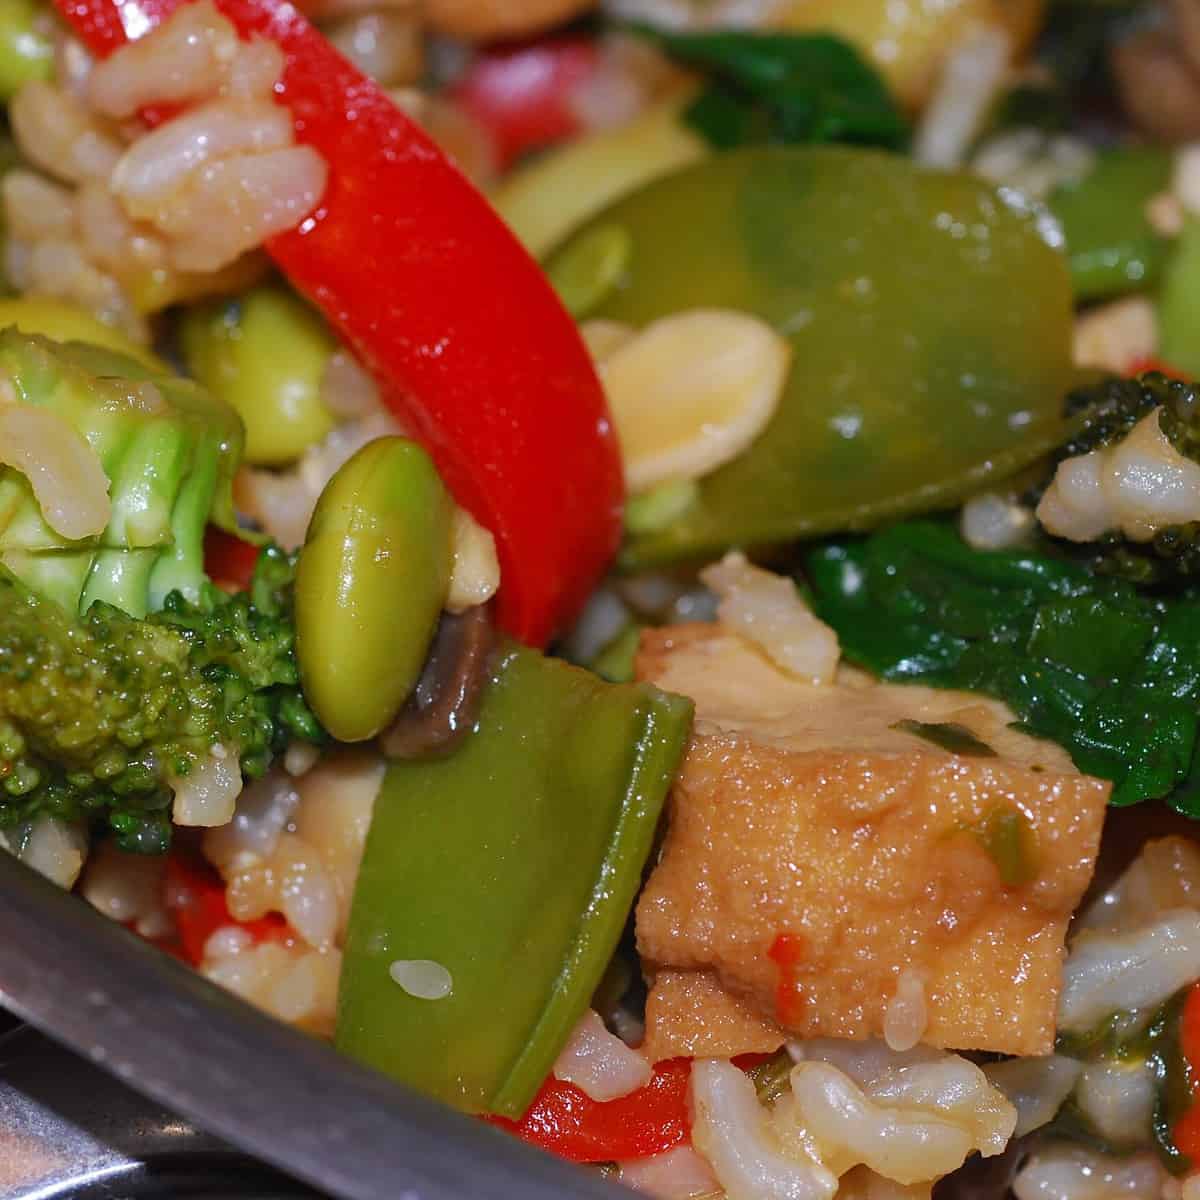  Colorful veggies collide in a bed of fluffy rice.